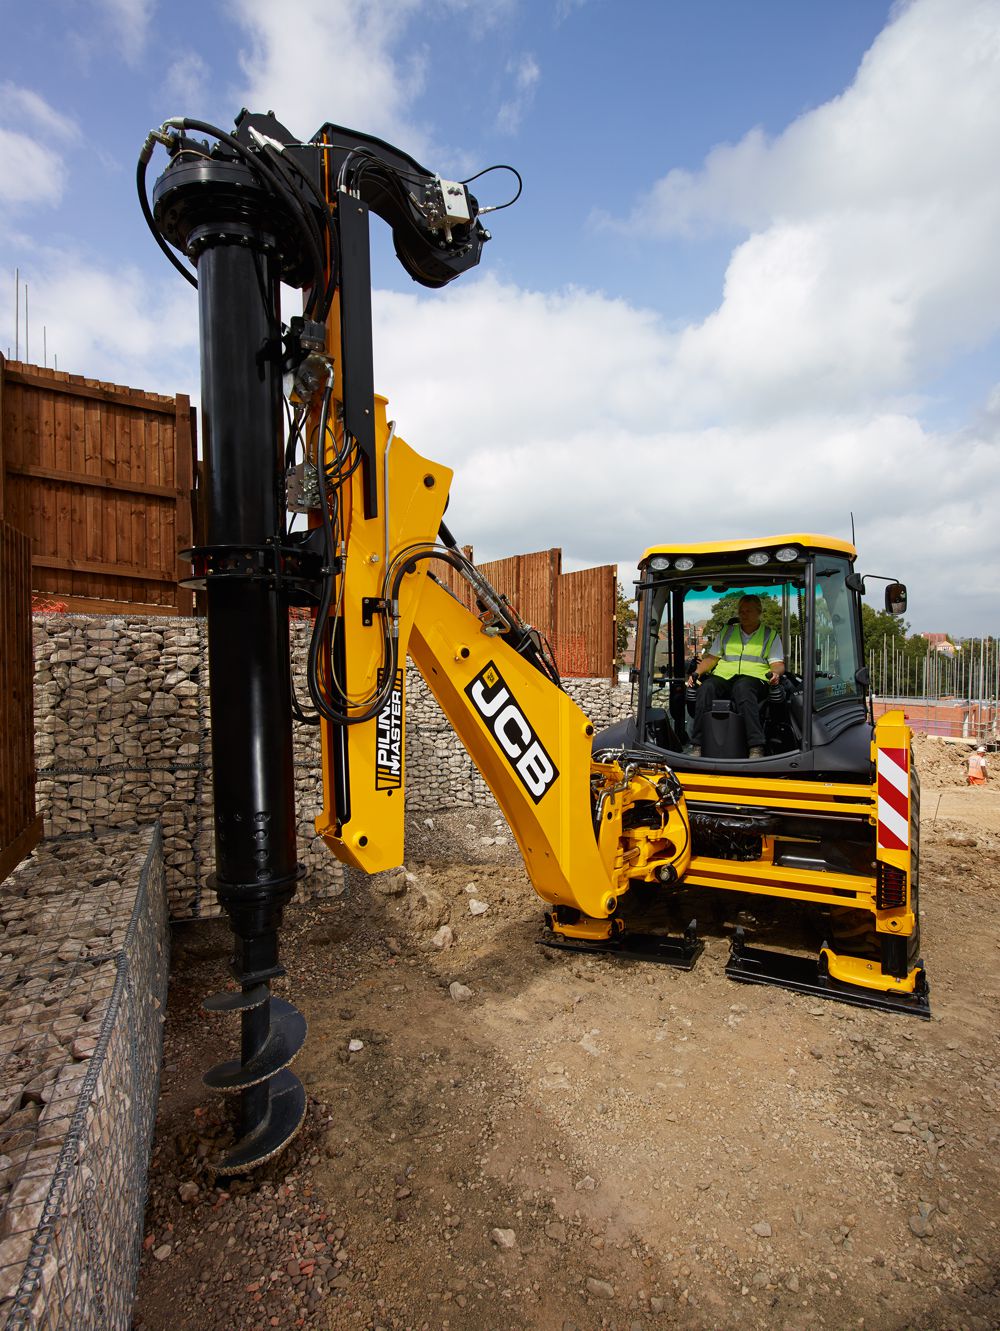 JCB breaks new ground with the JCB Pilingmaster ground engineering solution